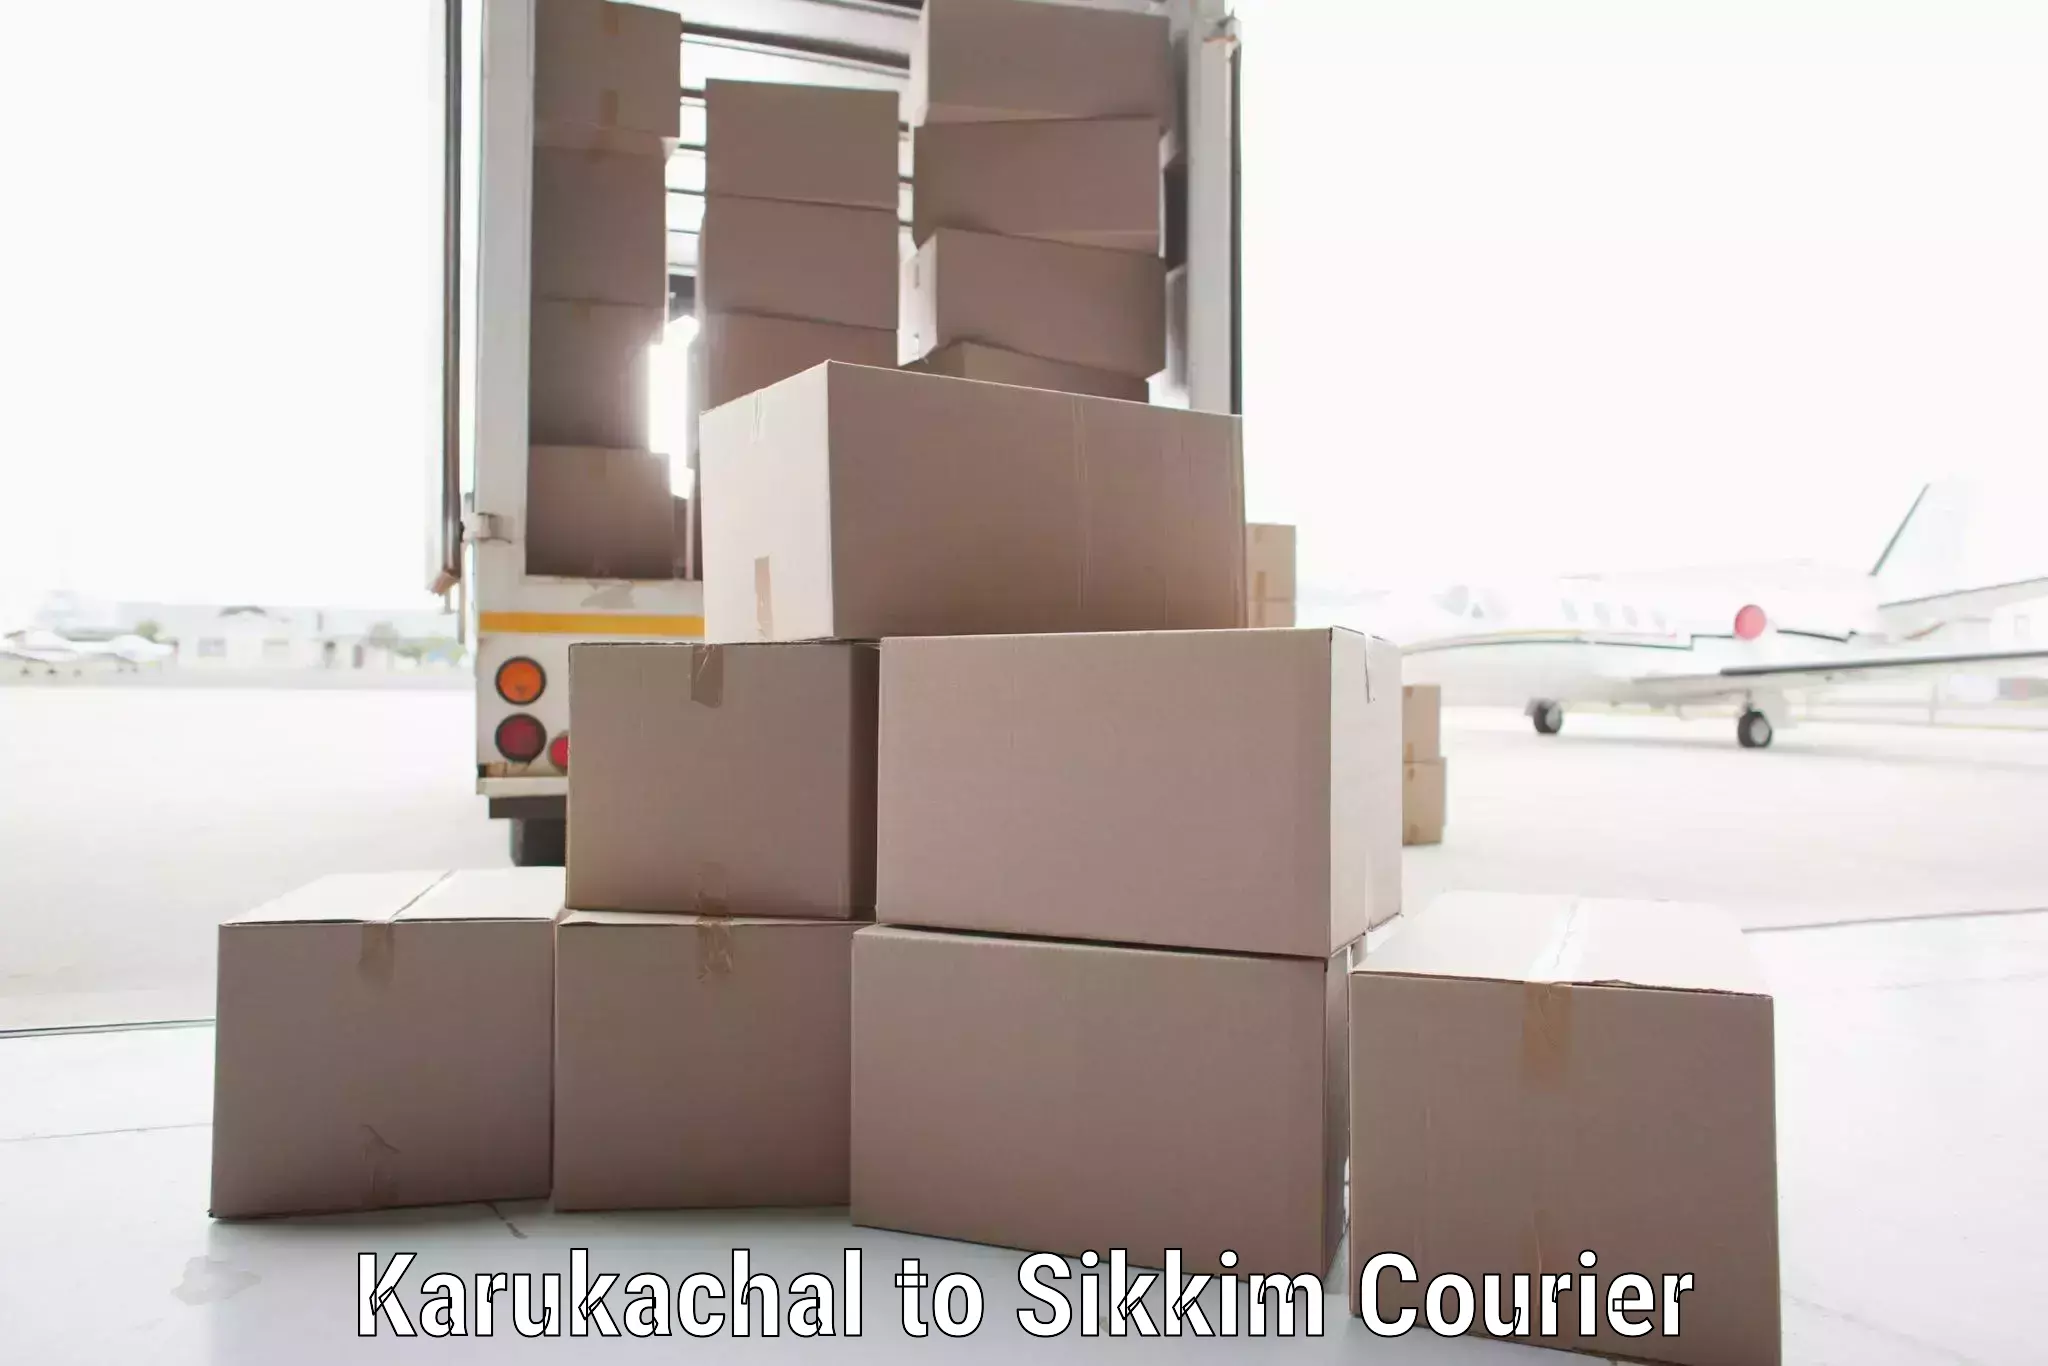 On-demand shipping options Karukachal to Pelling